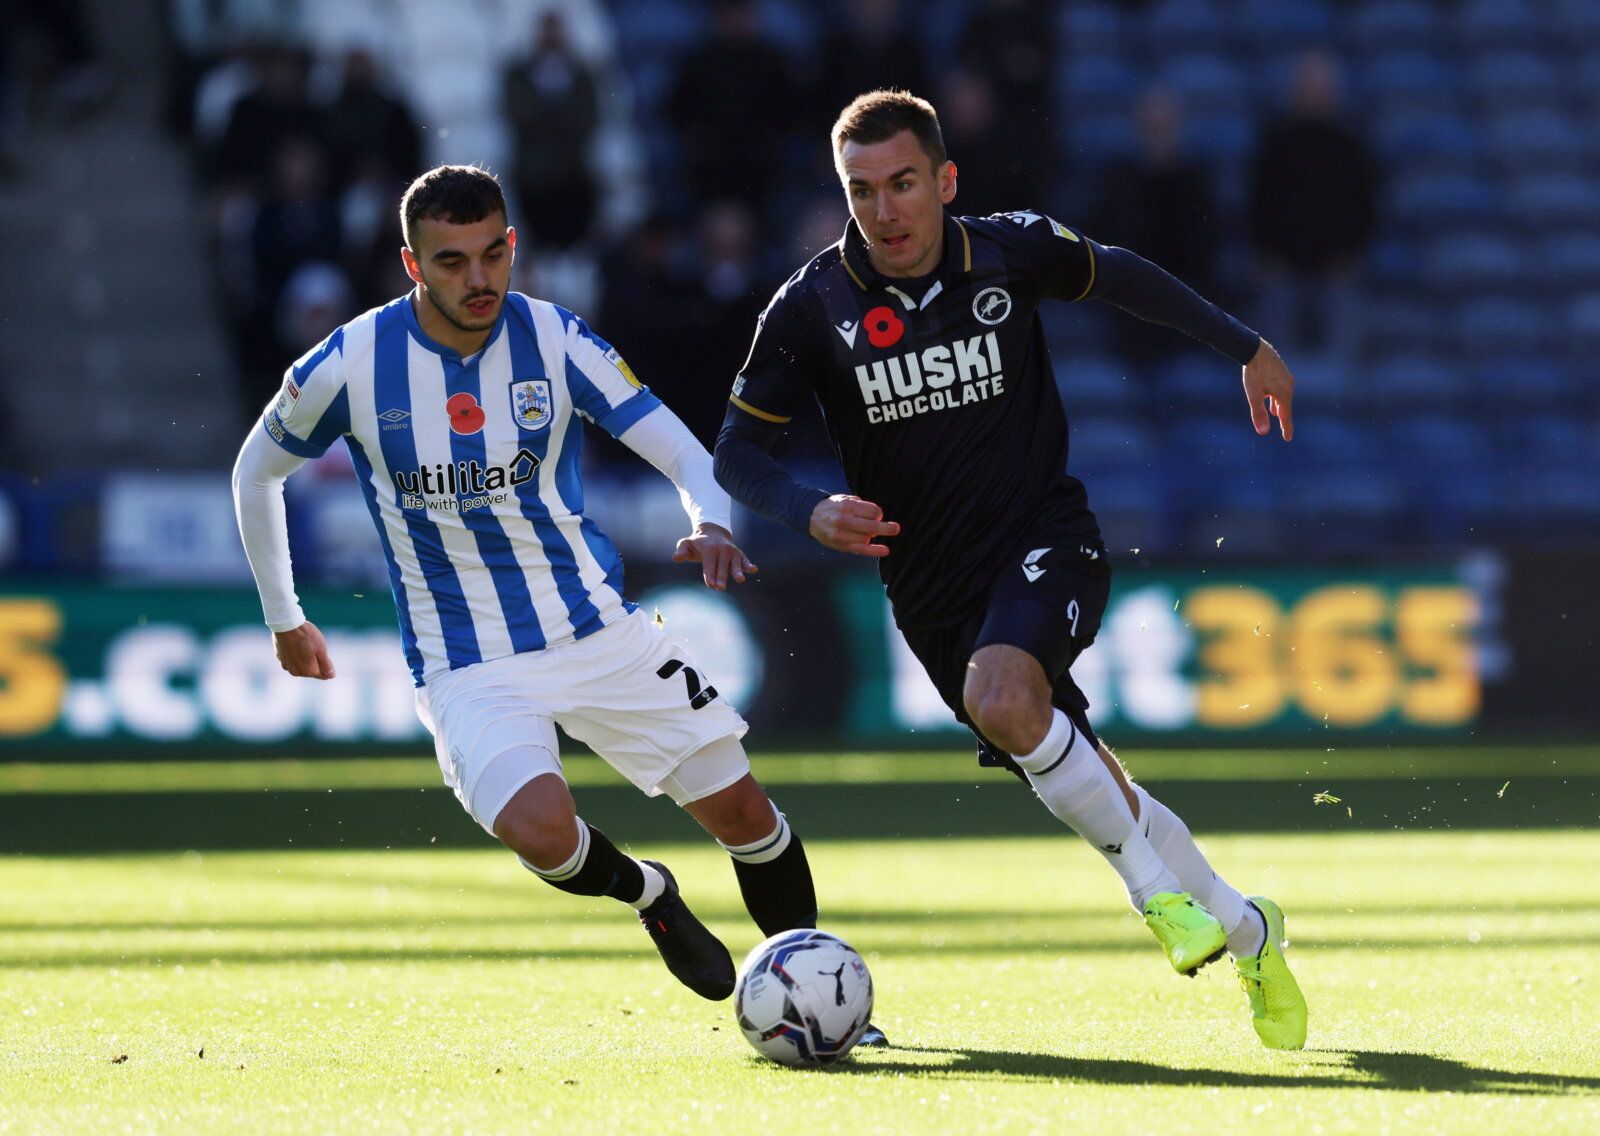 Soccer Football - Championship - Huddersfield Town v Millwall - John Smith's Stadium, Huddersfield, Britain - October 30, 2021 Millwall's Jed Wallace in action with Huddersfield Town's Danel Sinani   Action Images/John Clifton  EDITORIAL USE ONLY. No use with unauthorized audio, video, data, fixture lists, club/league logos or "live" services. Online in-match use limited to 75 images, no video emulation. No use in betting, games or single club/league/player publications.  Please contact your acc